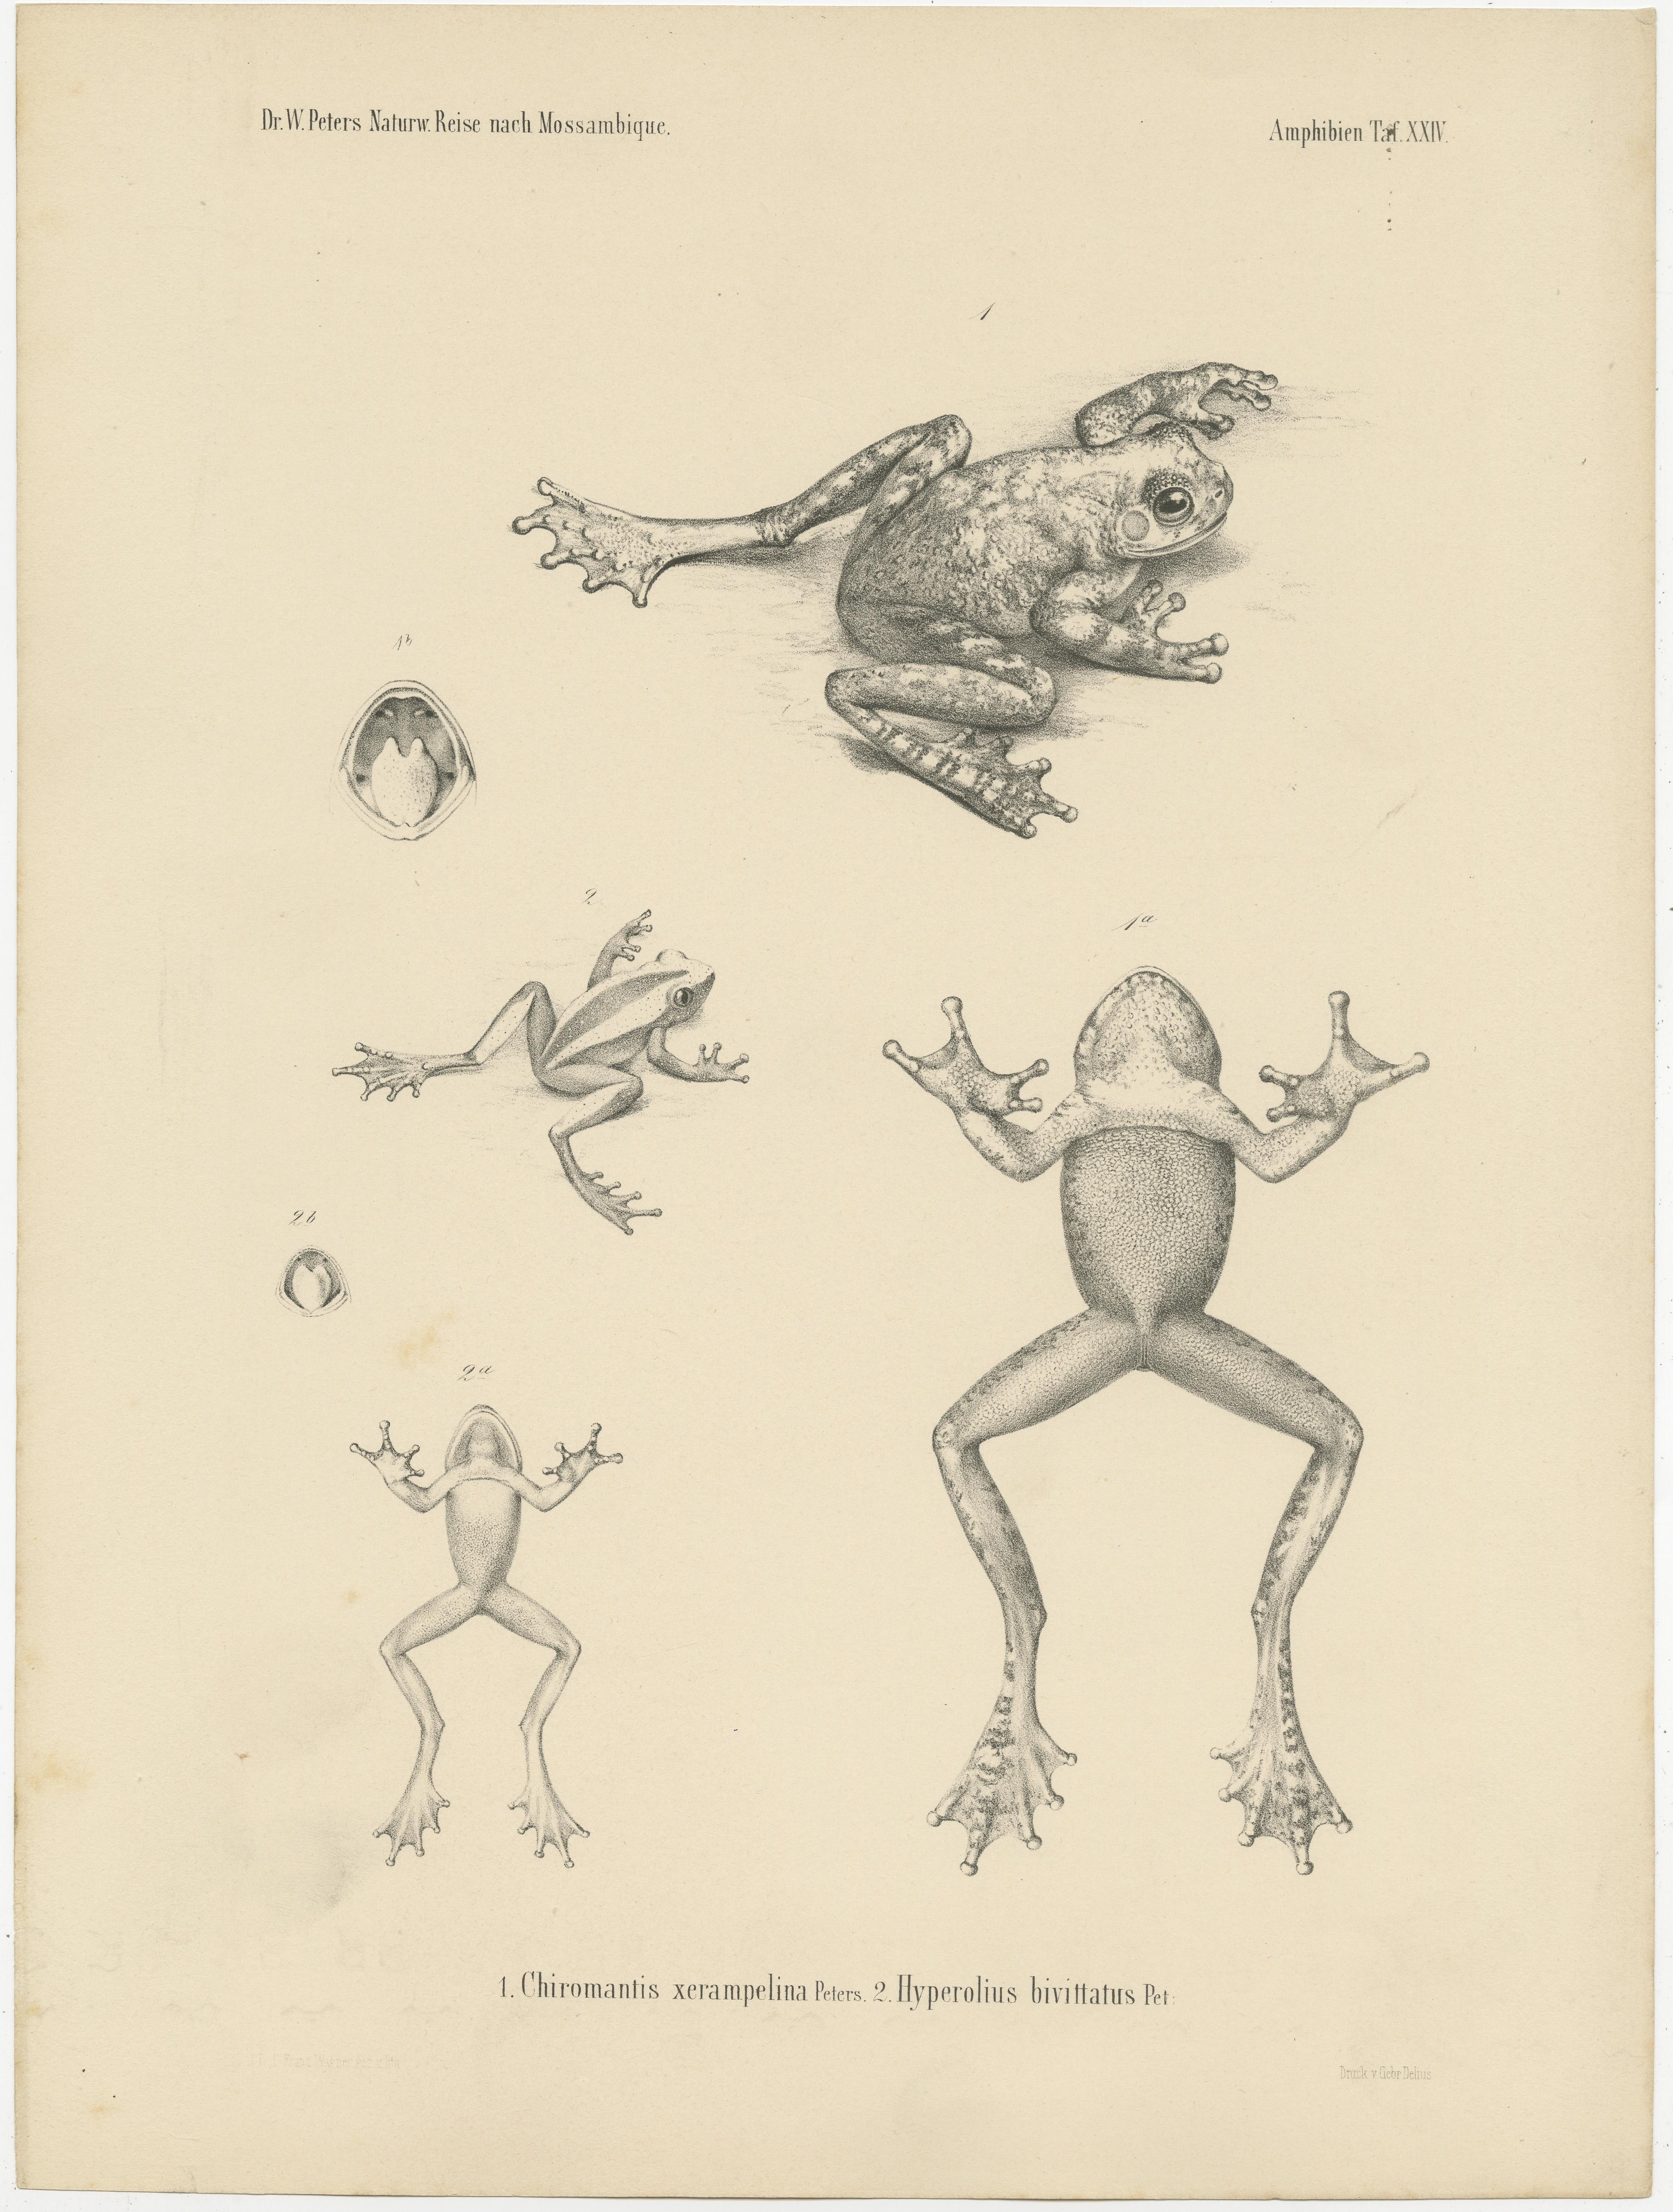 These antique prints from 'Naturwissenschaftliche Reise nach Mossambique' by Wilhelm C.H. Peters depict various frog species, including the Chiromantis xerampelina. The illustrations are meticulously detailed and capture the unique characteristics